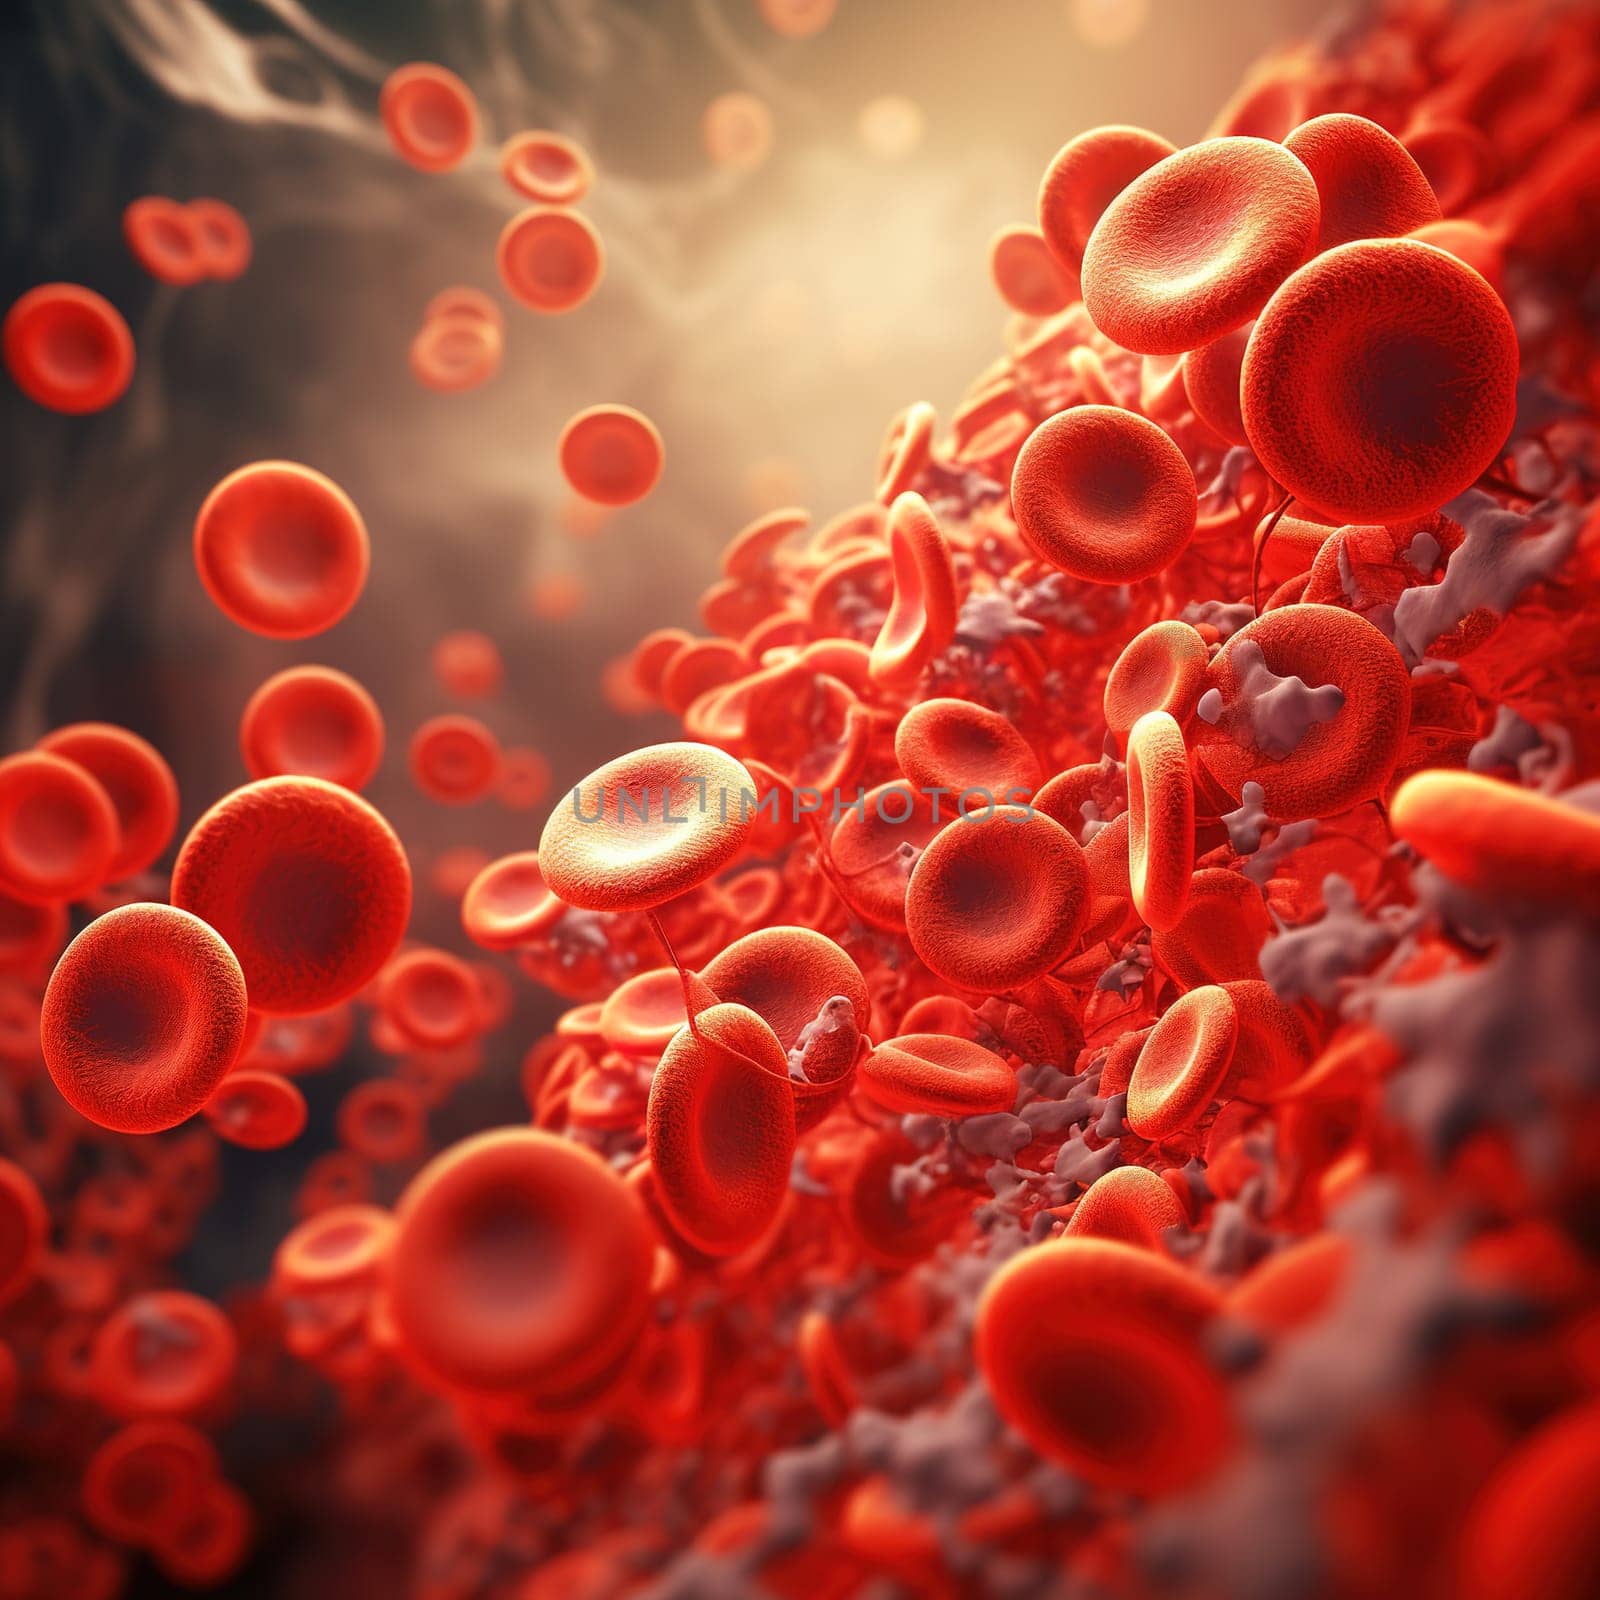 Detail to red blood cells in the bloodstream of the human, healthcare concept by Kadula